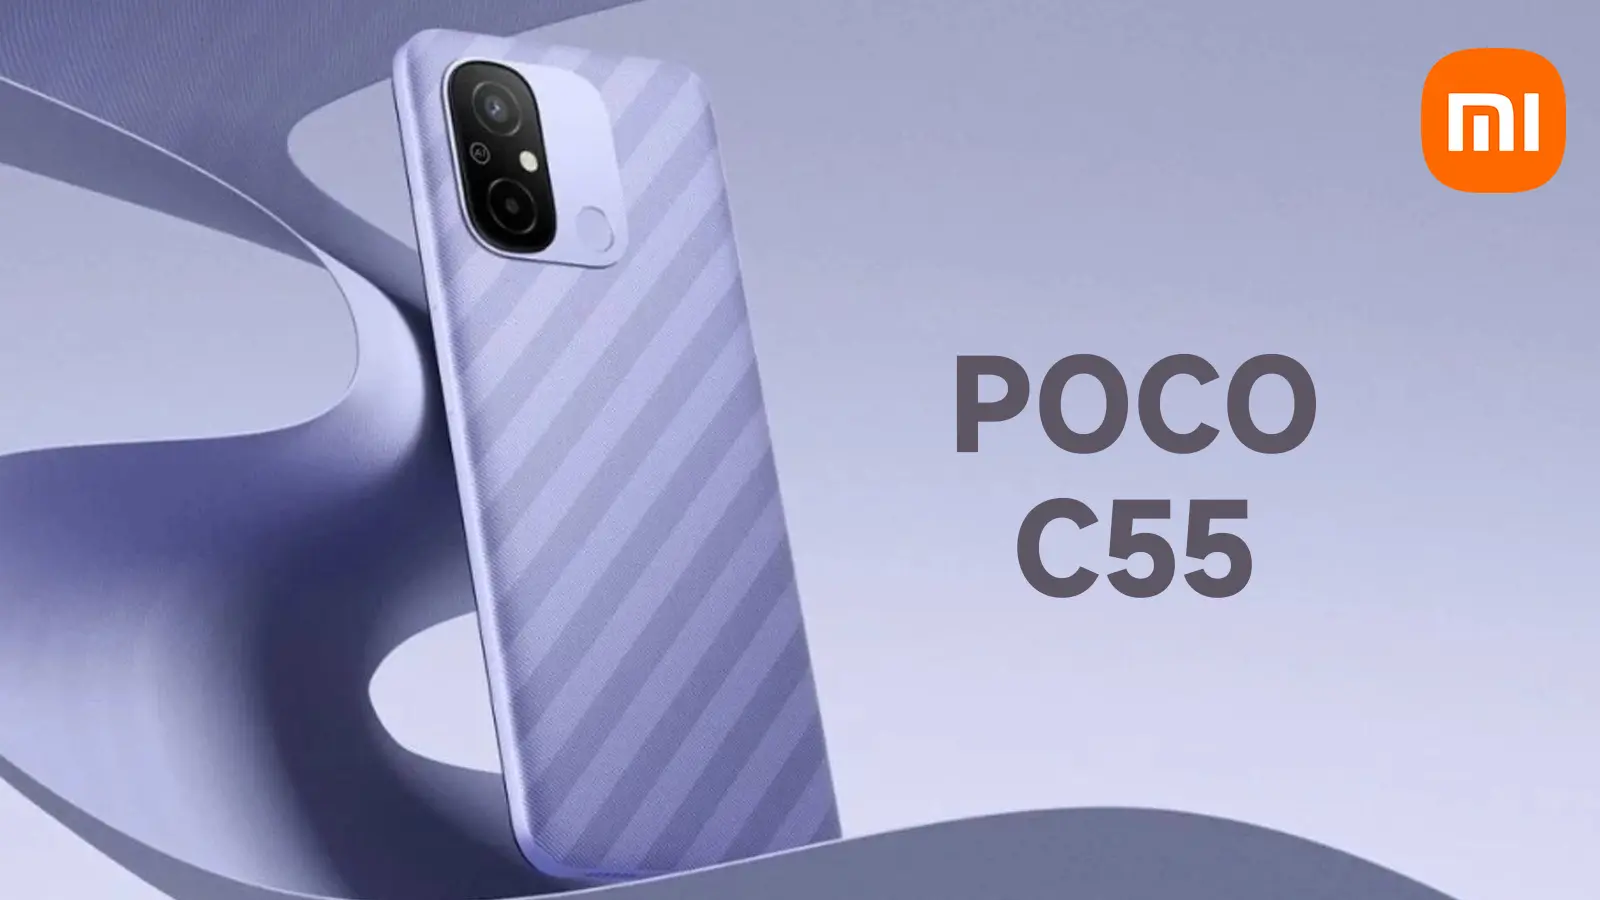 POCO C55: The Best Budget Smartphone with Powerful Processor